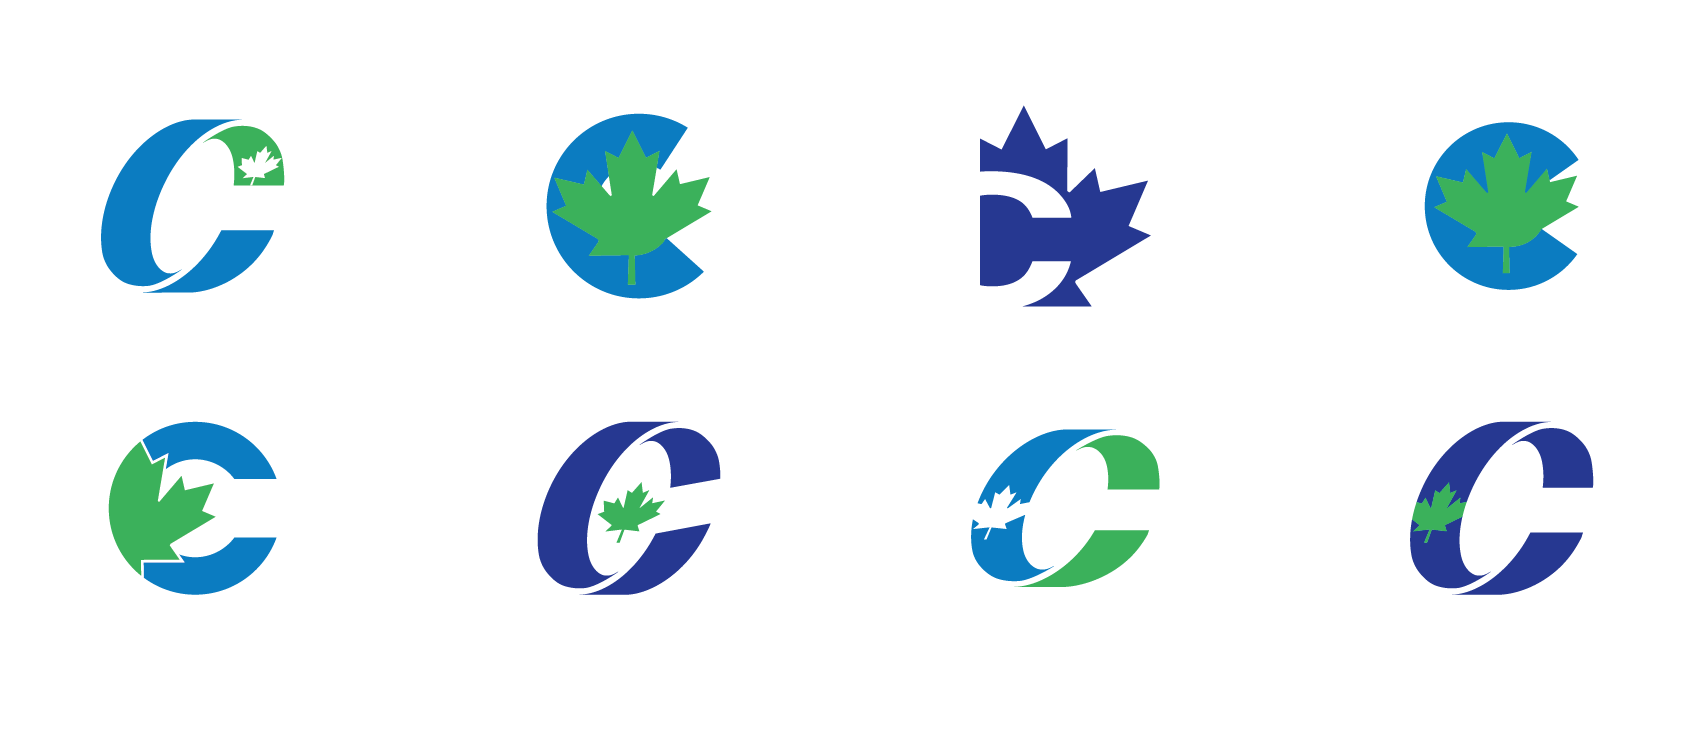 Conservative Party Visual Identity